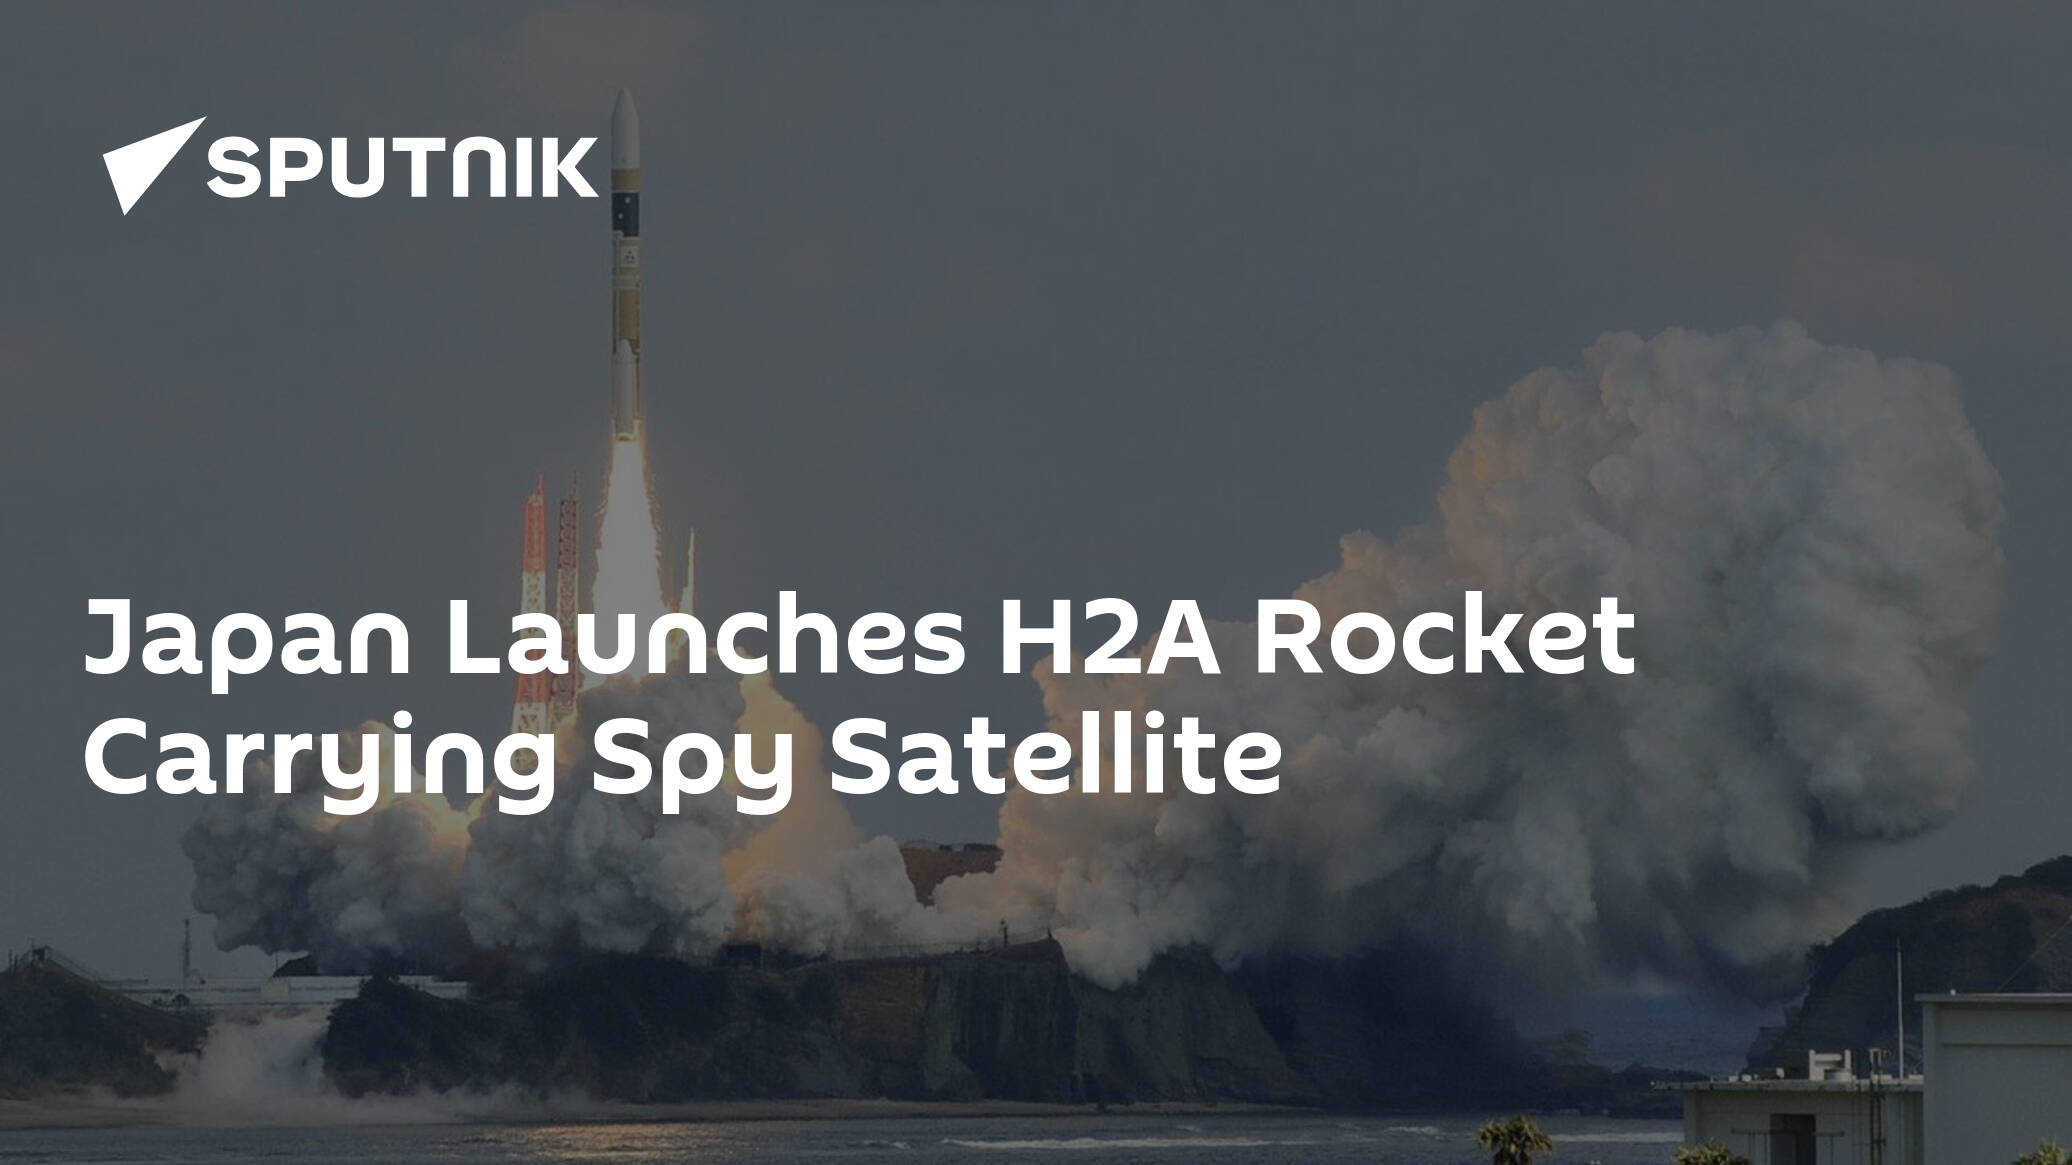 Japan Launches H2A Rocket Carrying Spy Satellite